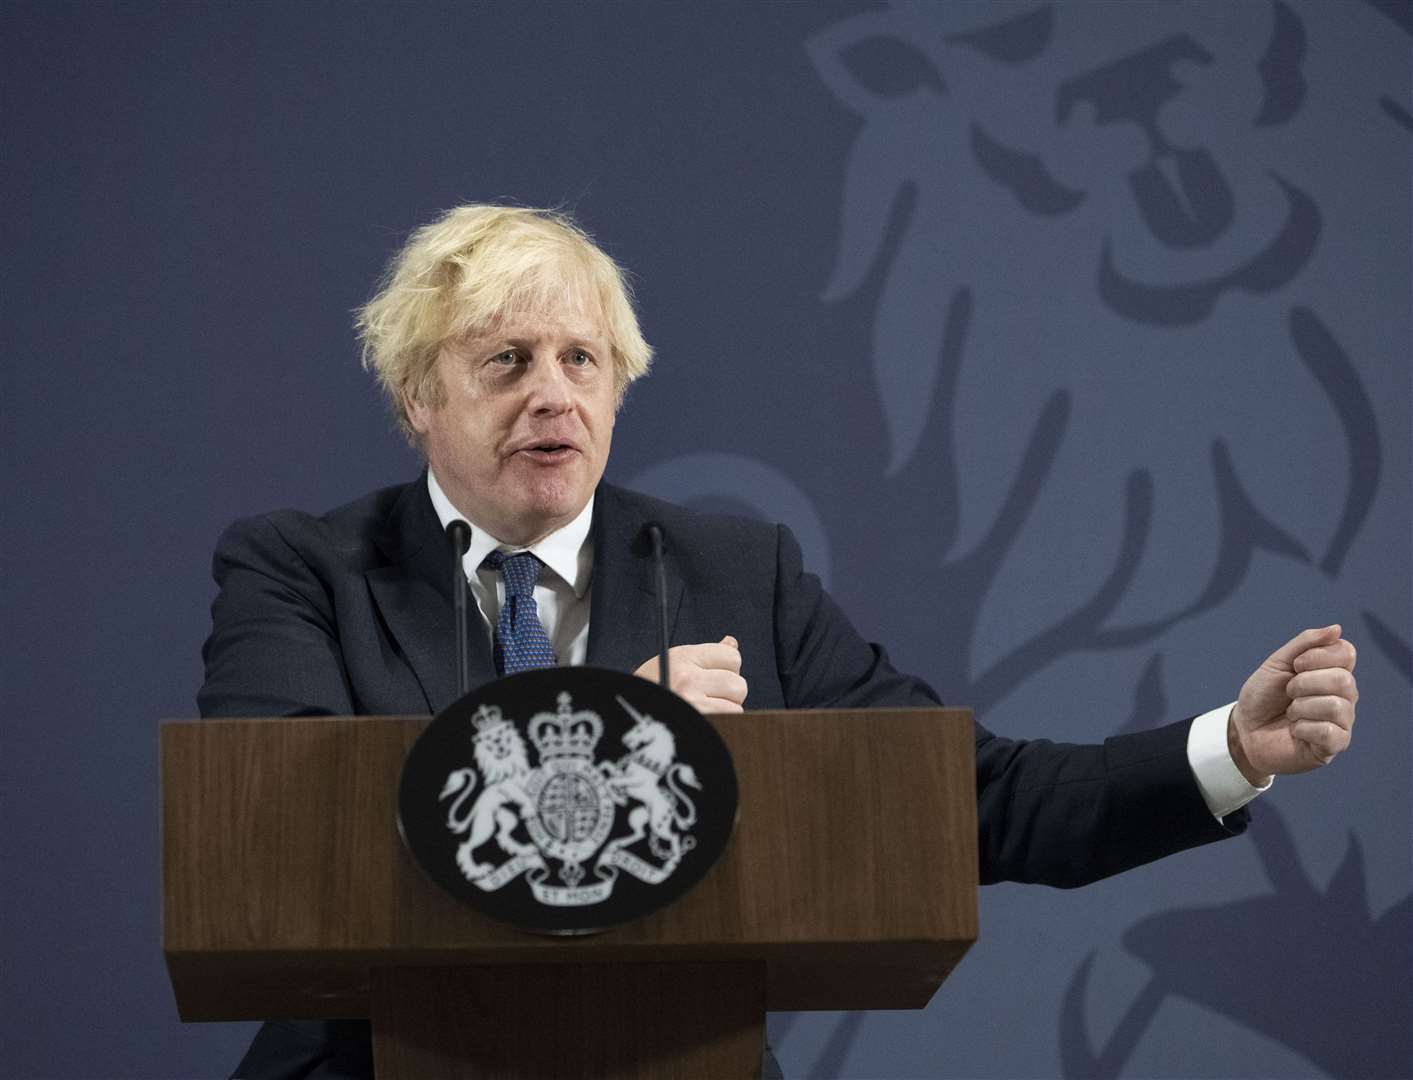 Levelling up was a key part of Boris Johnson’s agenda and the 2019 Conservative manifesto (David Rose/Daily Telegraph/PA)